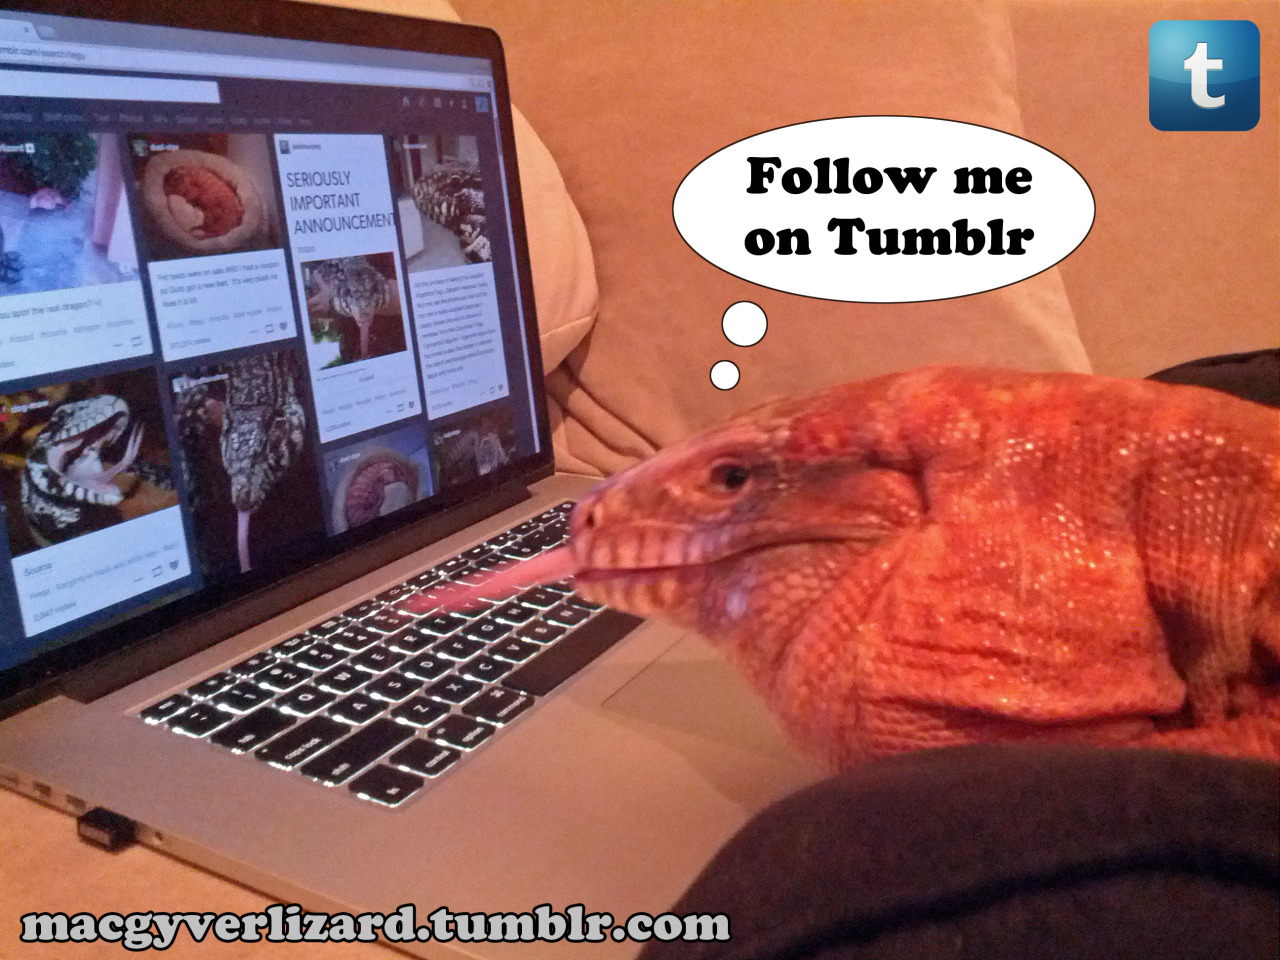 MacGyver the Lizard - On the internet, nobody knows you are a giant lizard